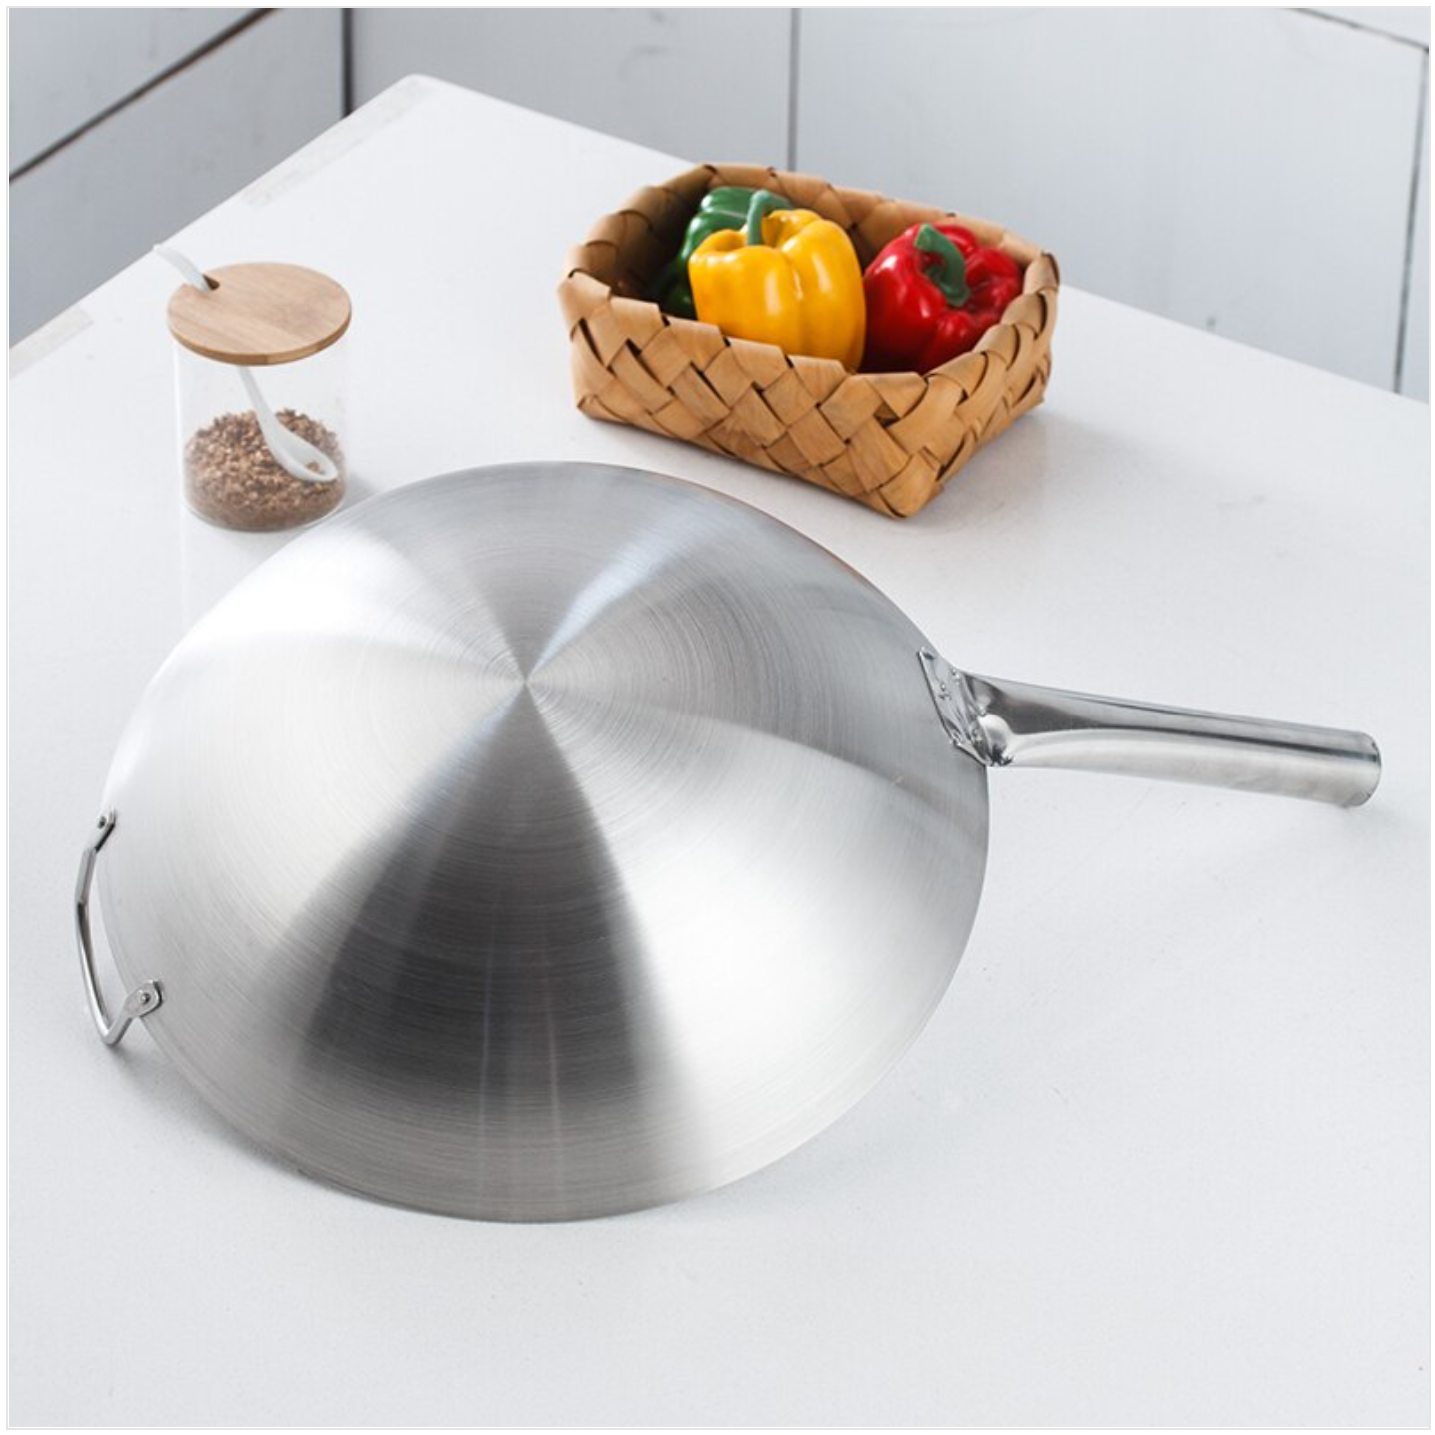 30cm Stainless Steel Wok Pan With Long & Short Handles